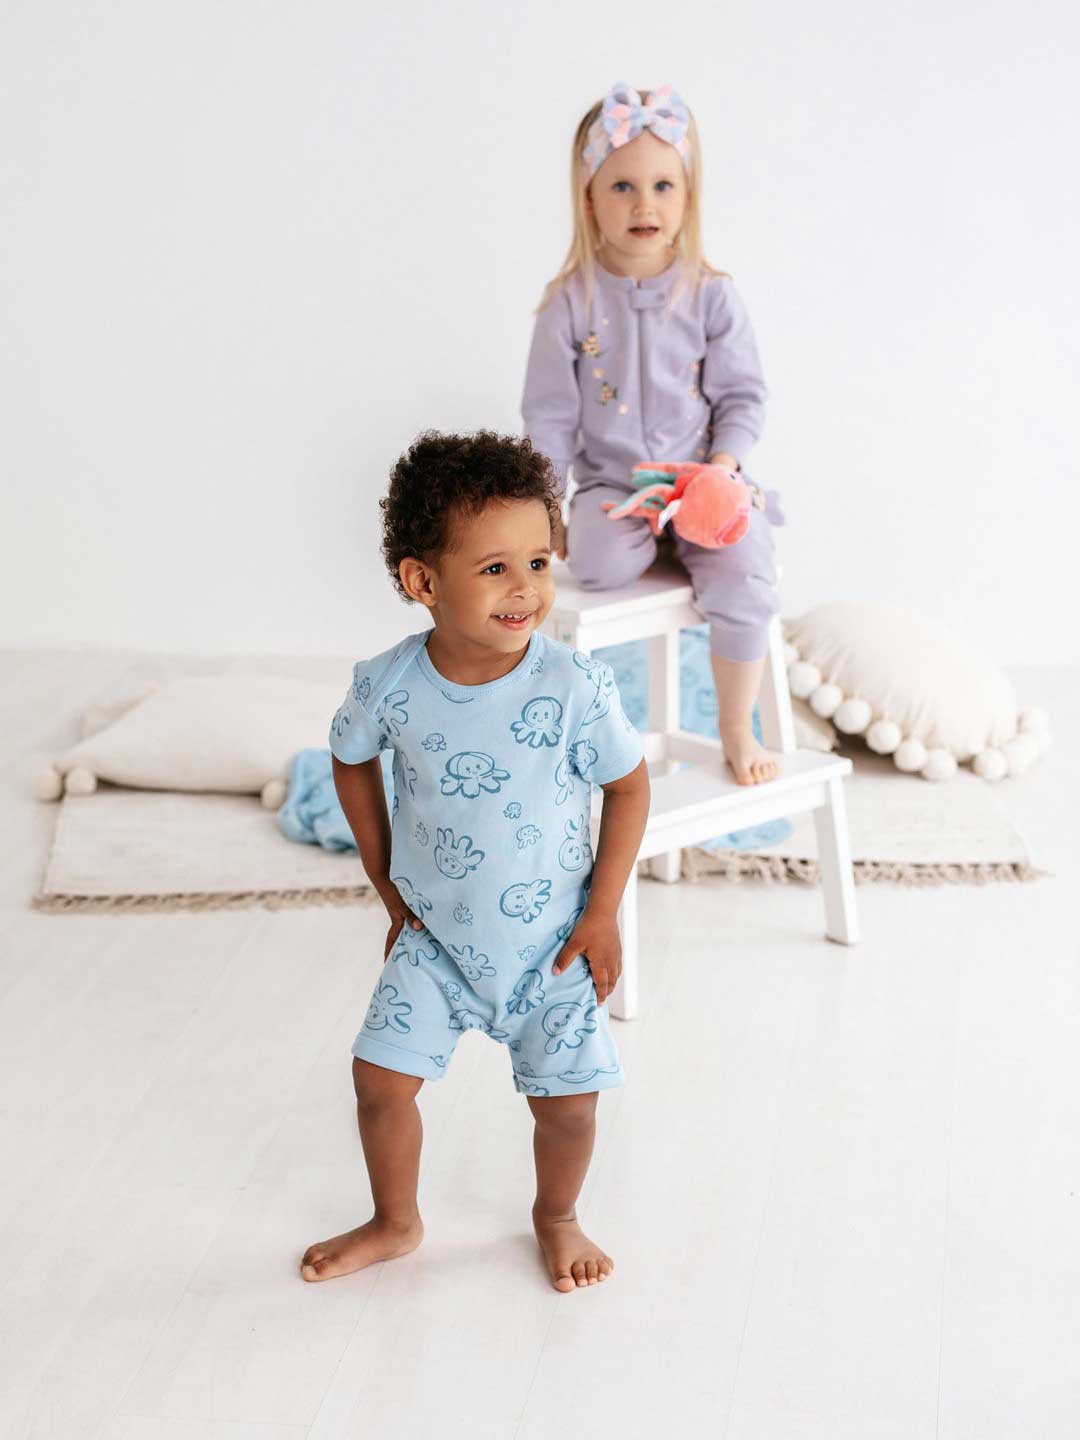 Cute boy and girl playing. The boy wears Infant Overall Short Sea Friends 344 and the girl wears  Infant Overall Squirell